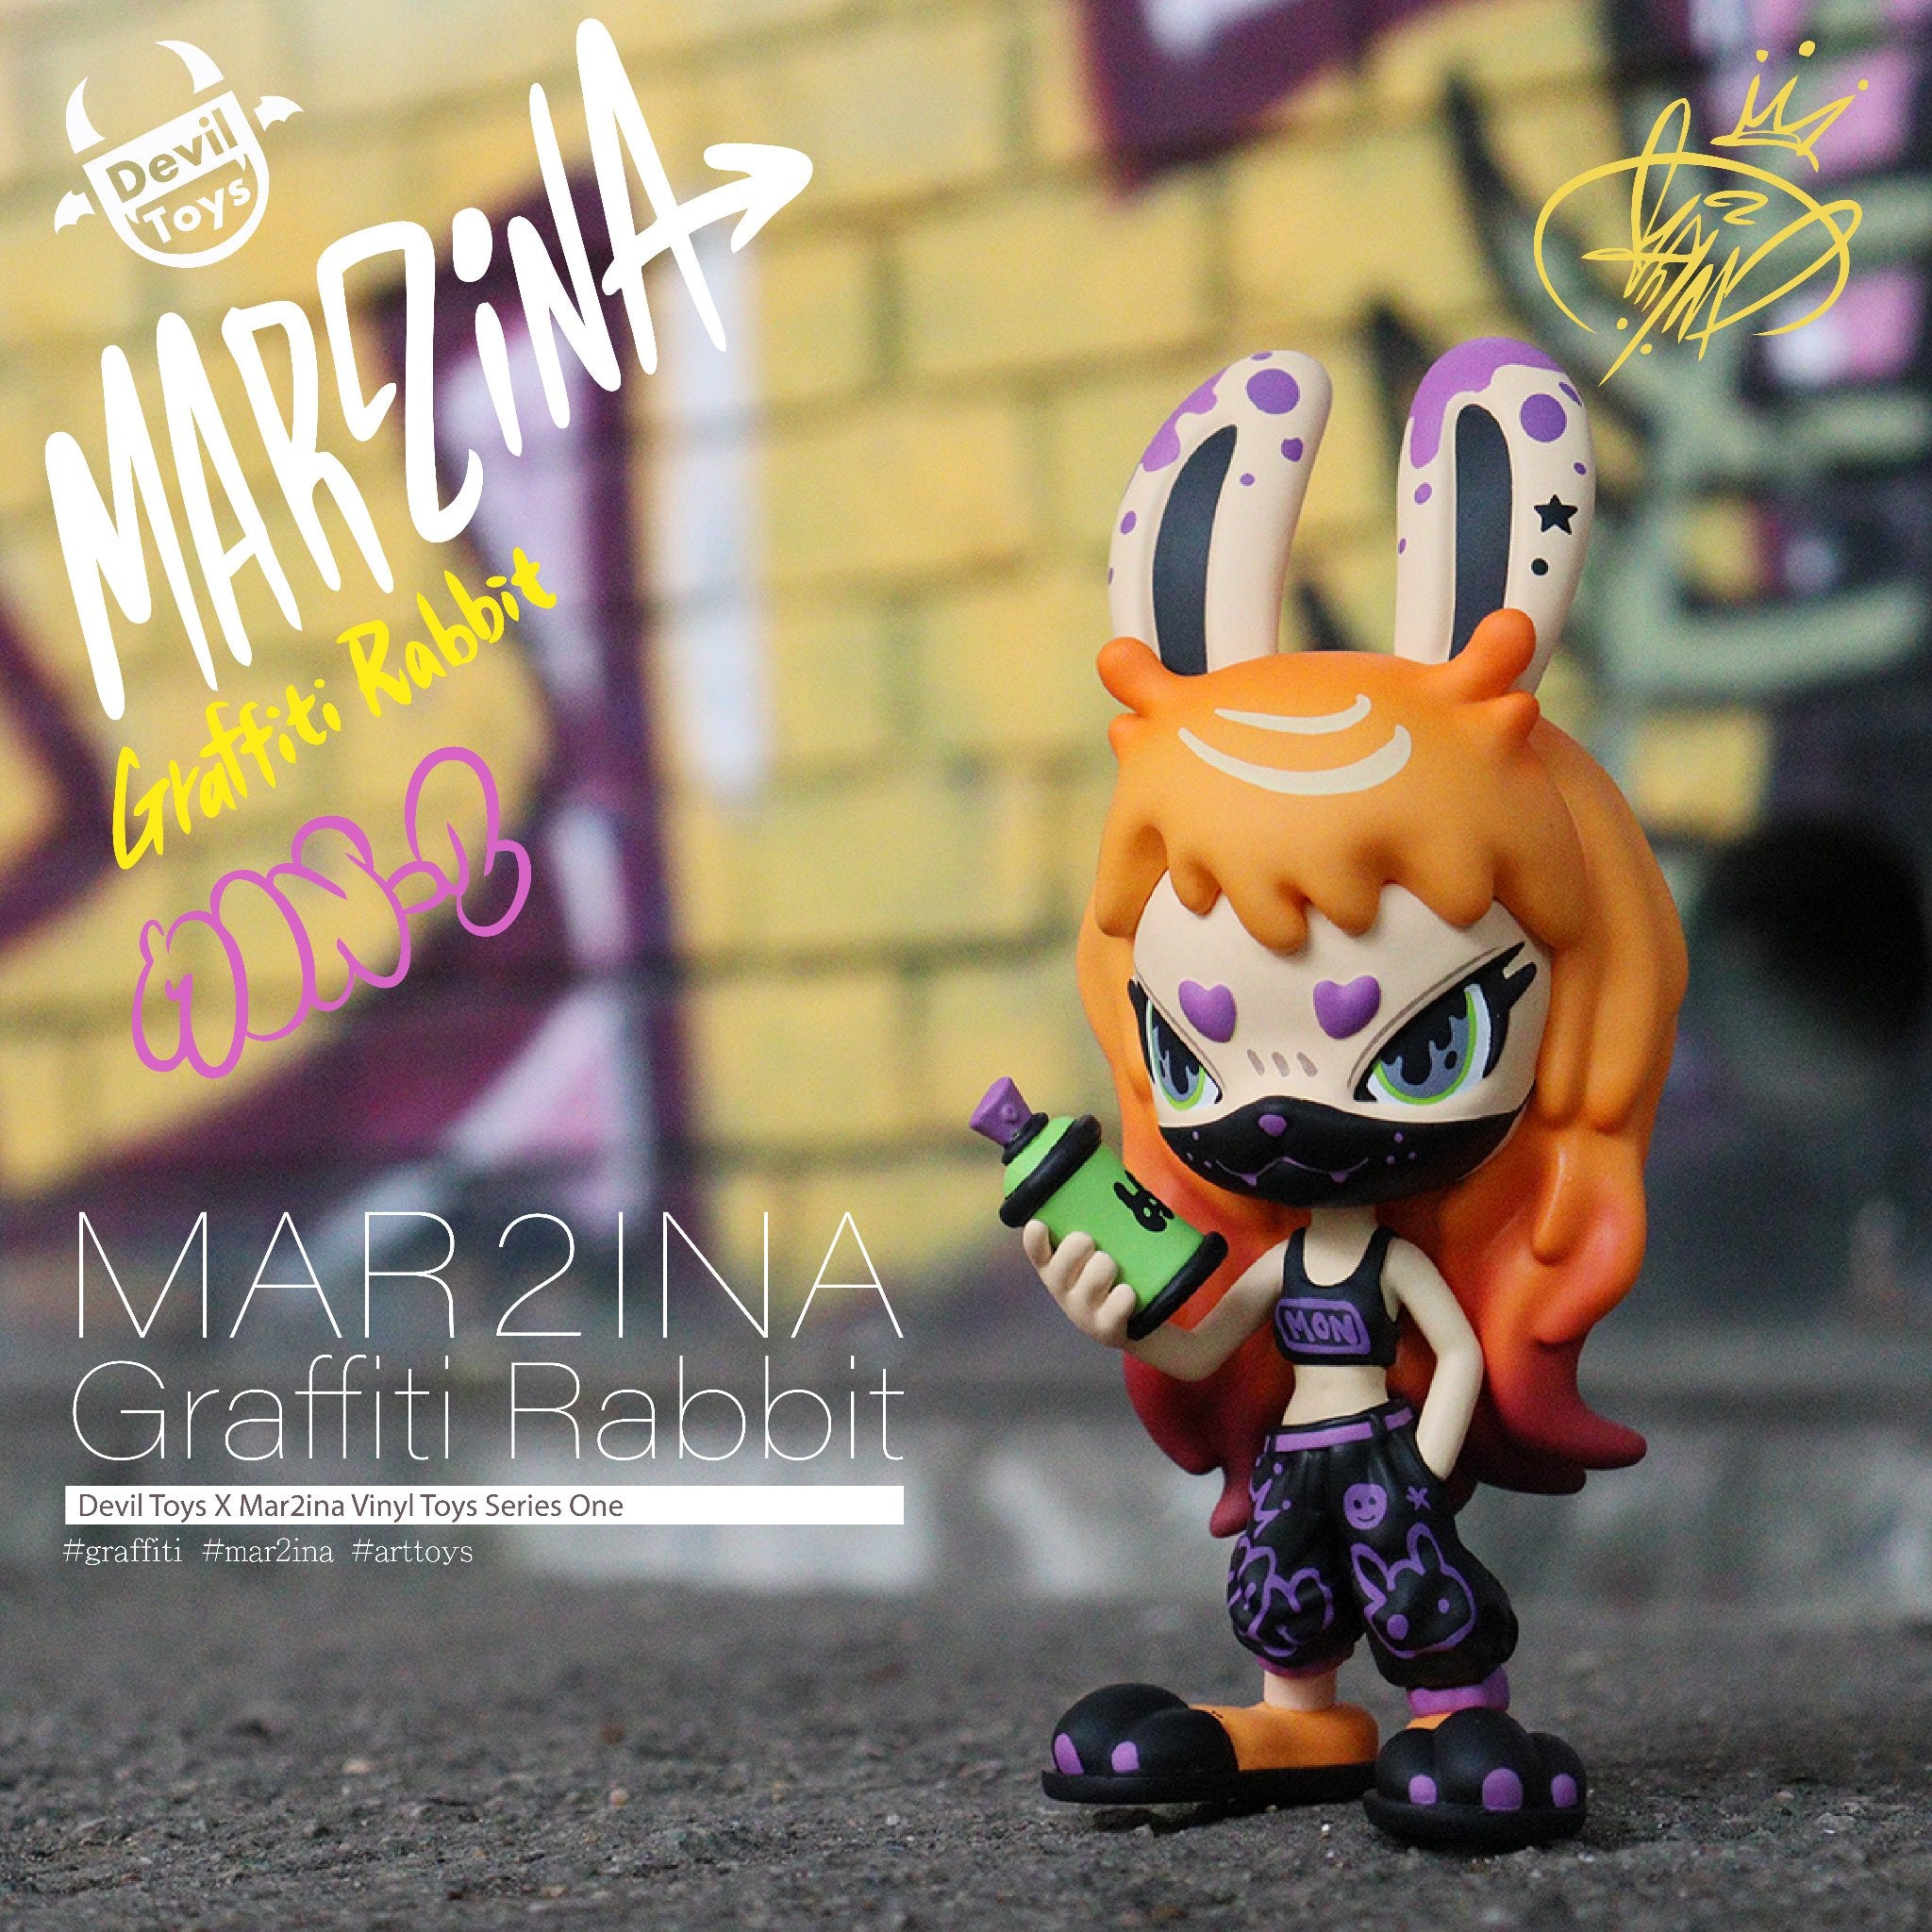 Mon-2 Graffiti Rabbit (Second Colorway) by Mar2ina